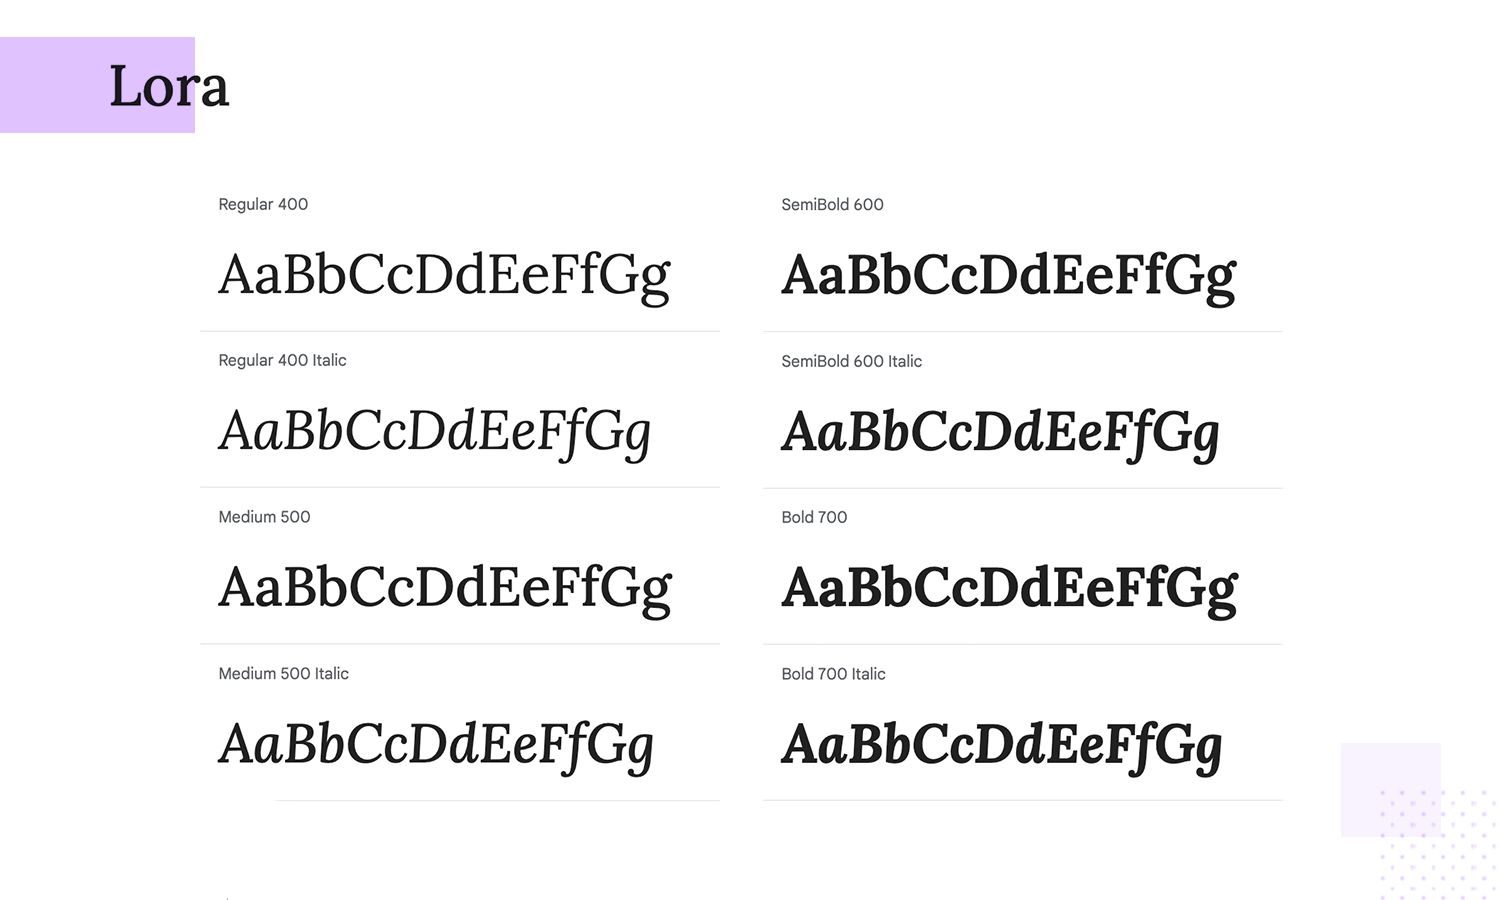 Lora font showcase featuring various weights from Regular 400 to Bold 700, including italic styles